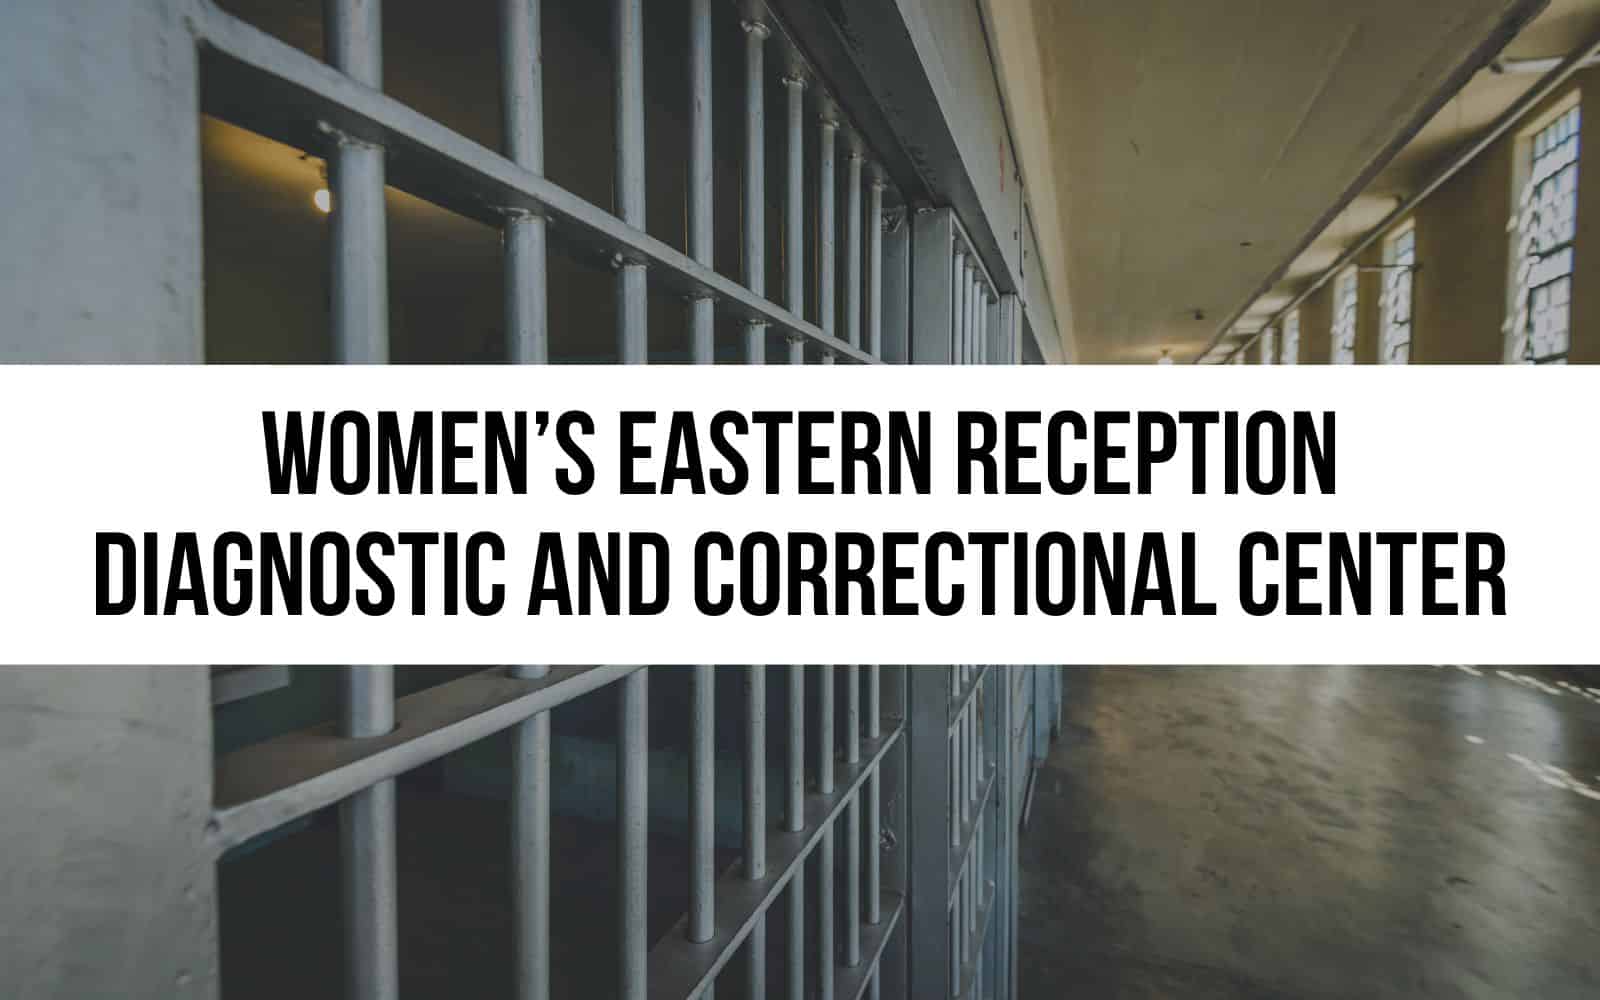 Women’s Eastern Reception Diagnostic and Correctional Center